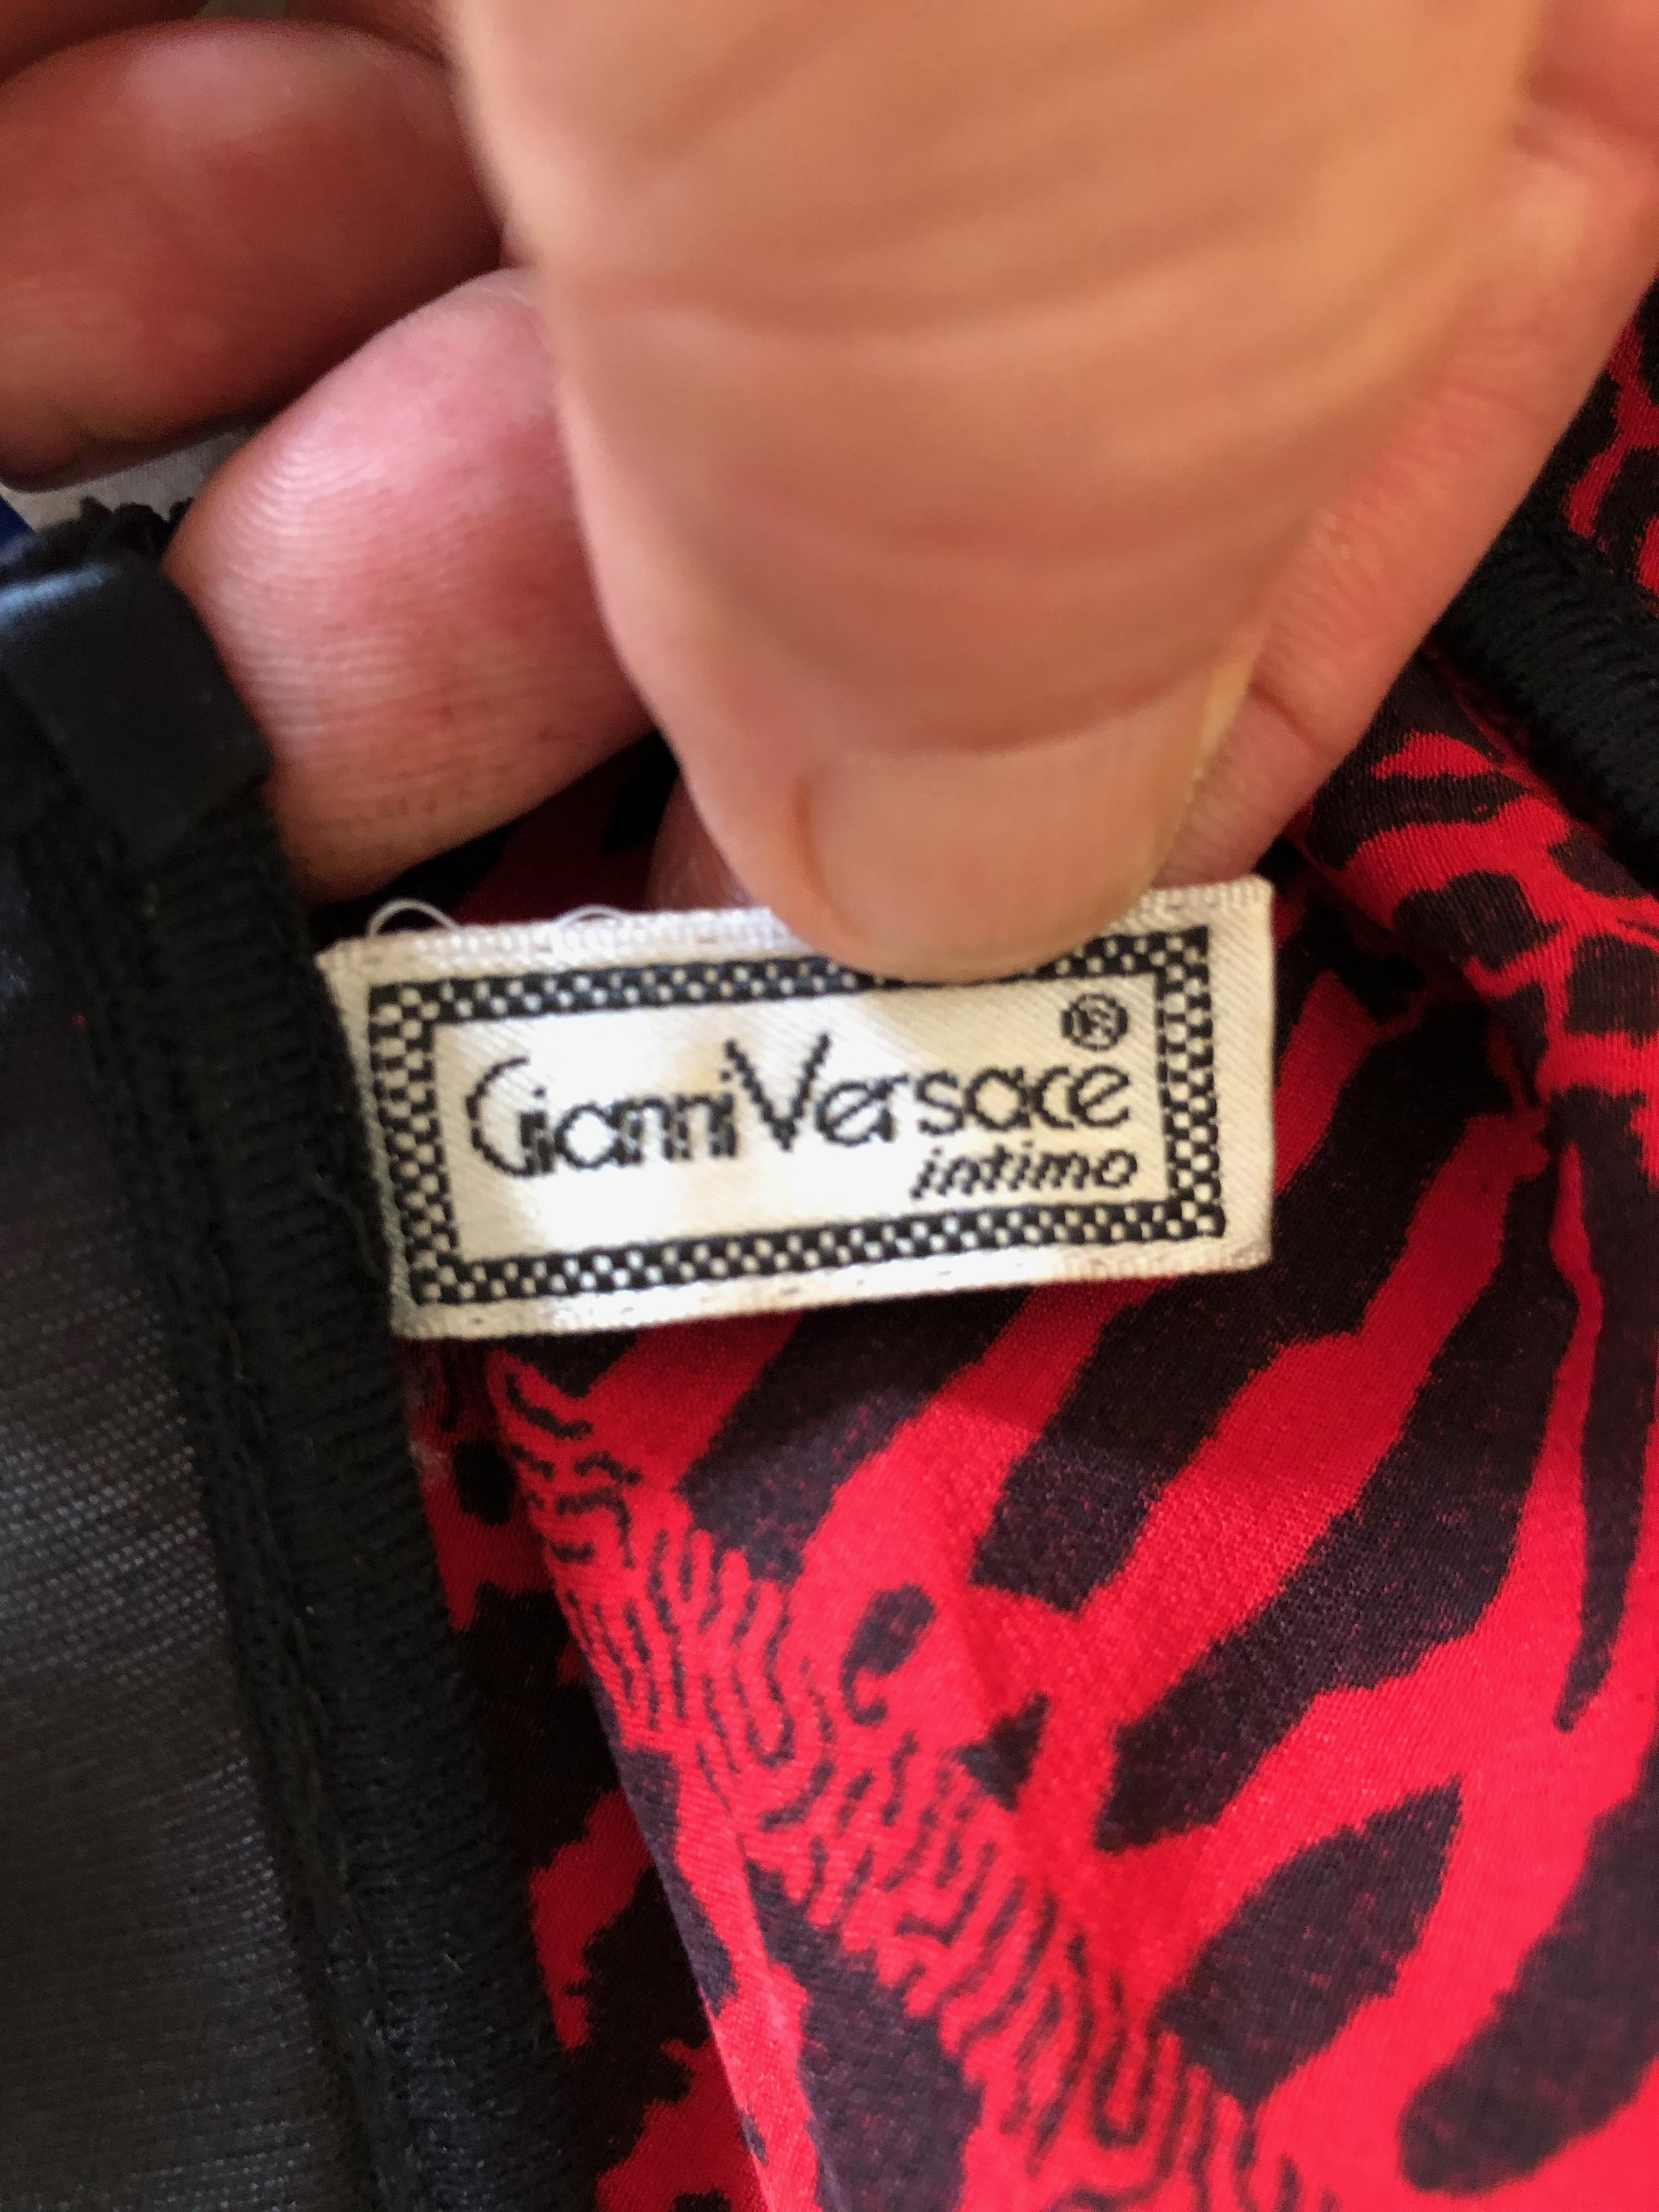 Gianni Versace Intime 1980's Leopard and Lace Corset with Garter Stays
Late eighties.
So good
There is no size label Est .size 36
Bust 36